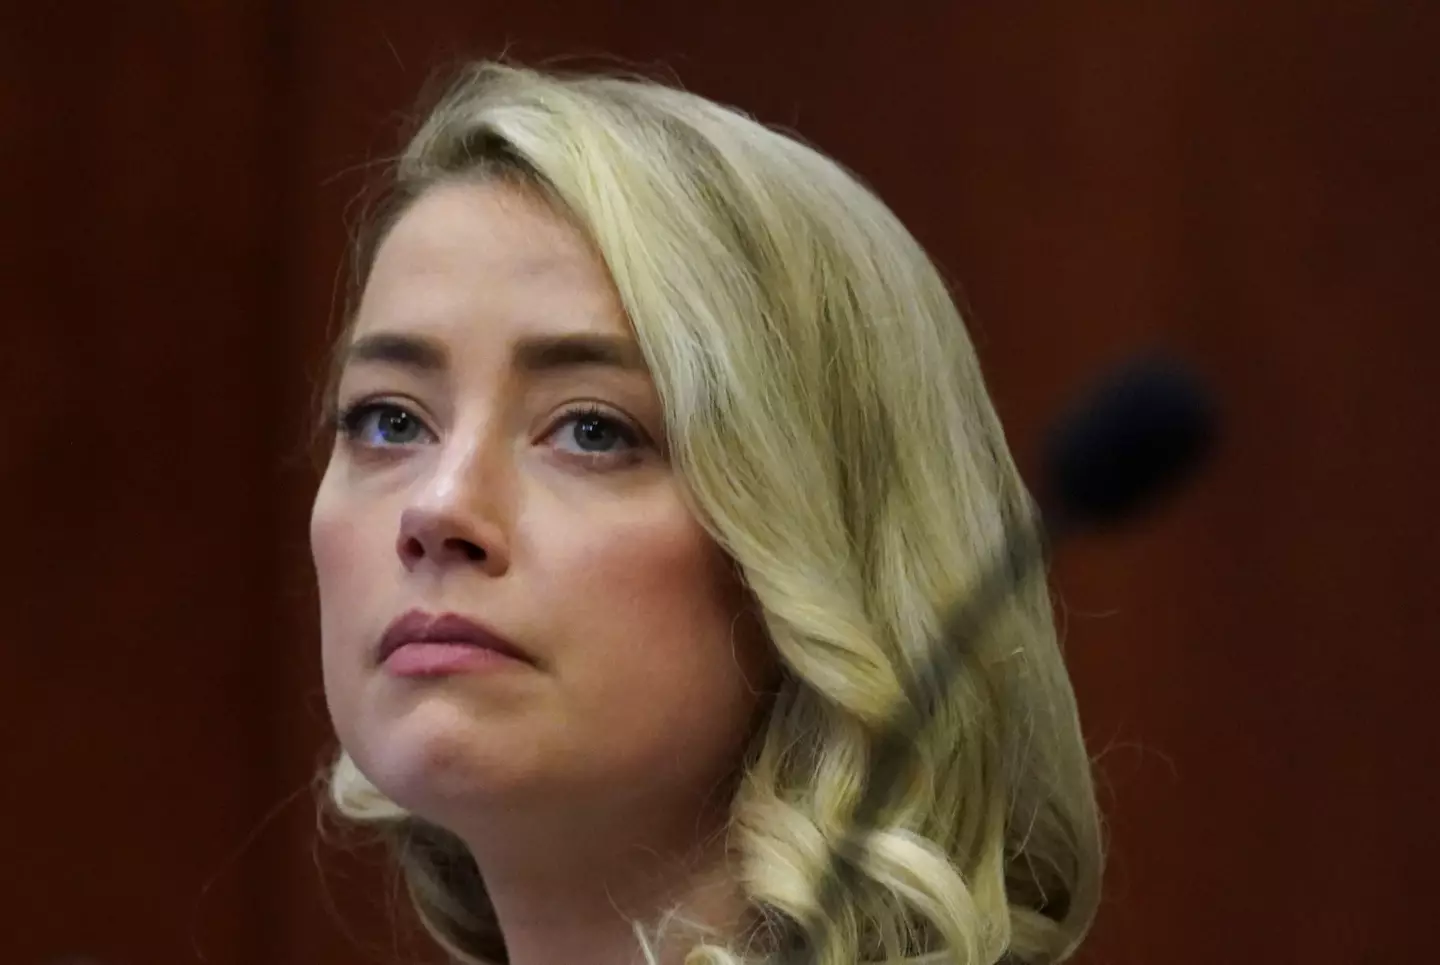 Amber Heard has launched an appeal against the defamation verdict.